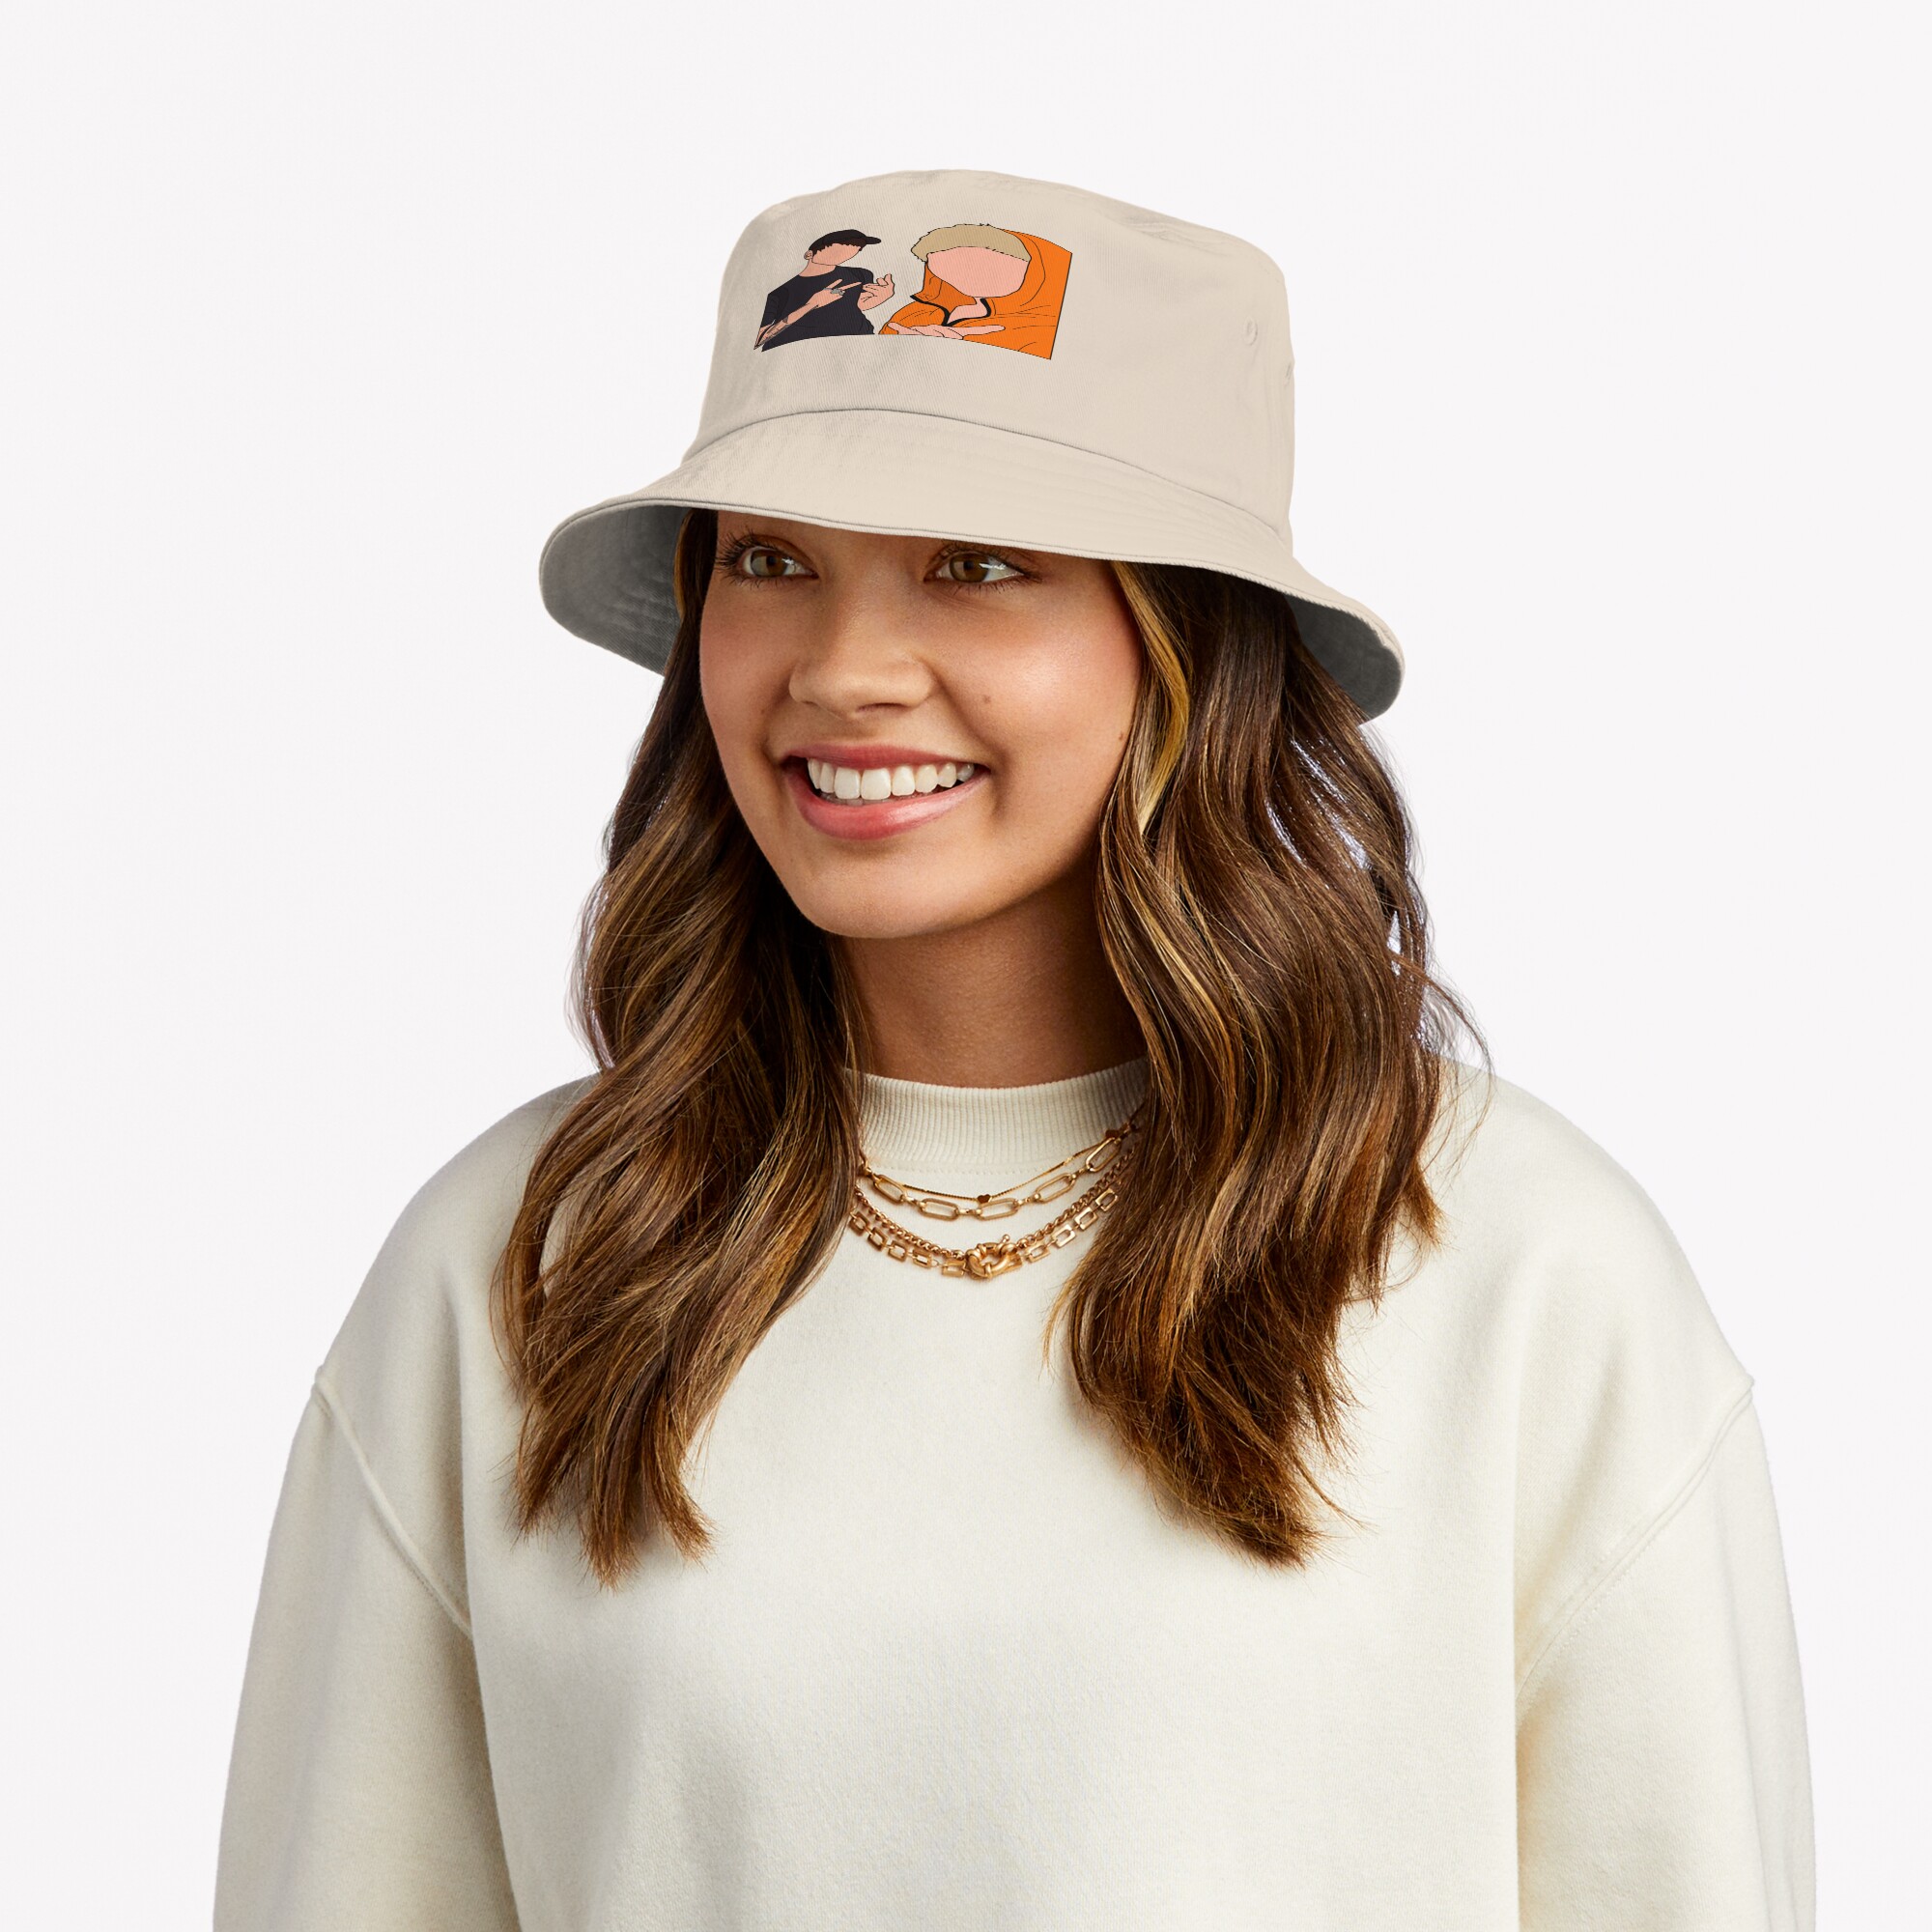 ssrcobucket hatwomense5d6c5f62bbf65eefrontsquare2000x2000 bgf8f8f8 2 - Sam And Colby Shop